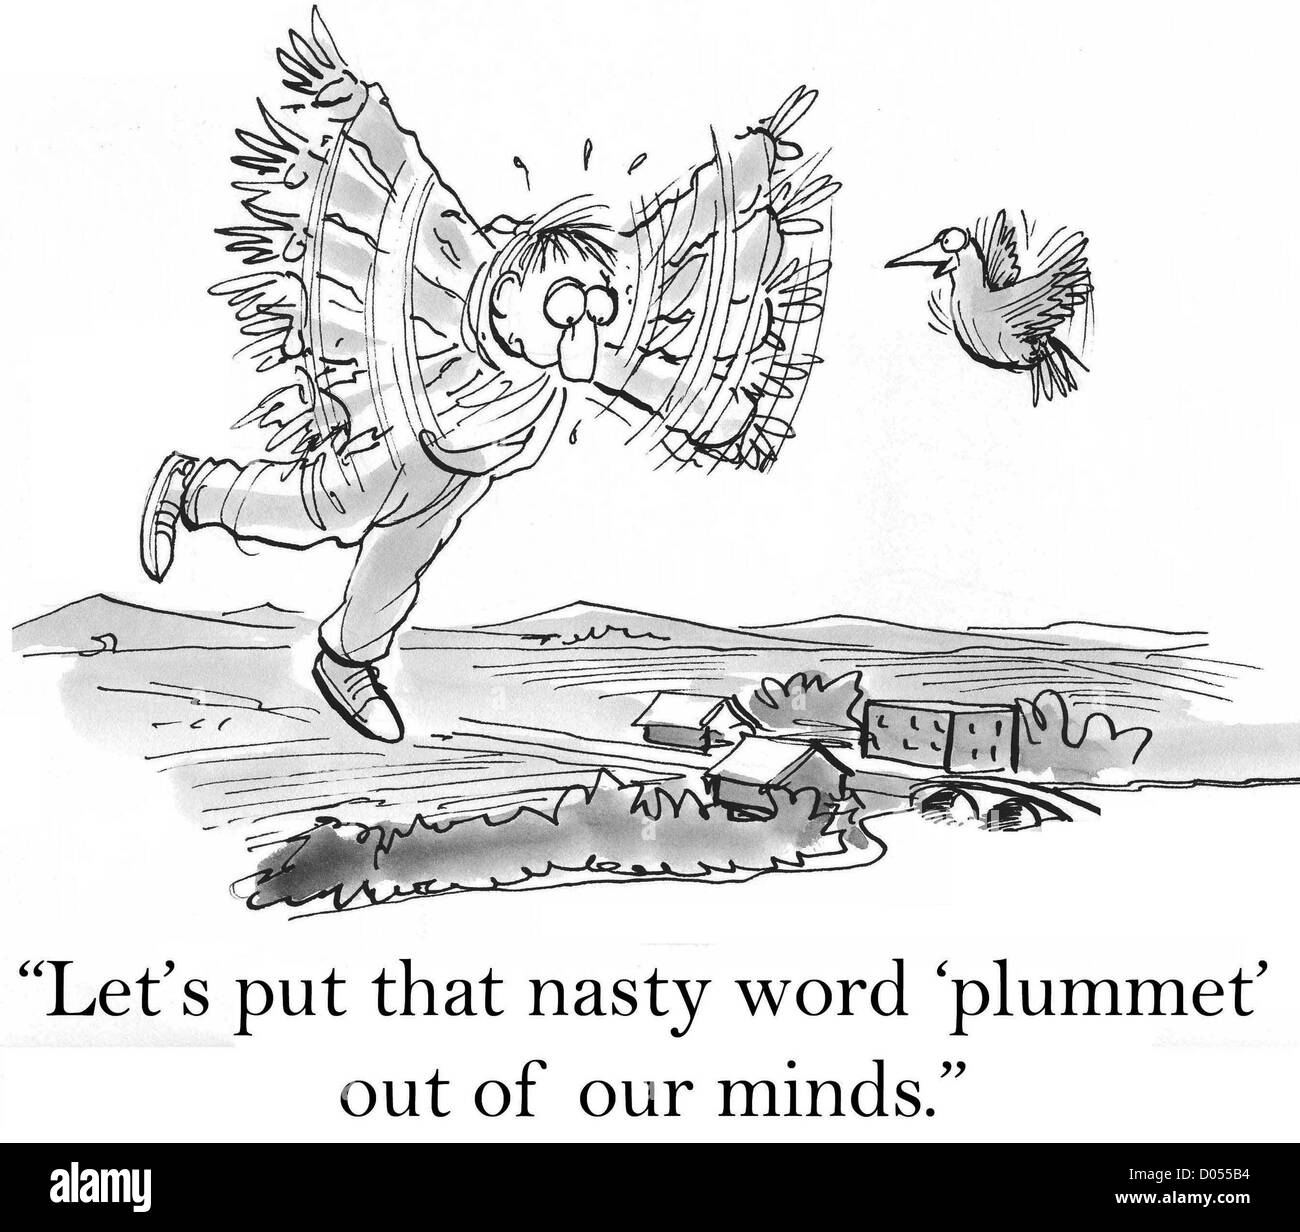 'Let's put that nasty word 'plummet' out of our minds.' Stock Photo